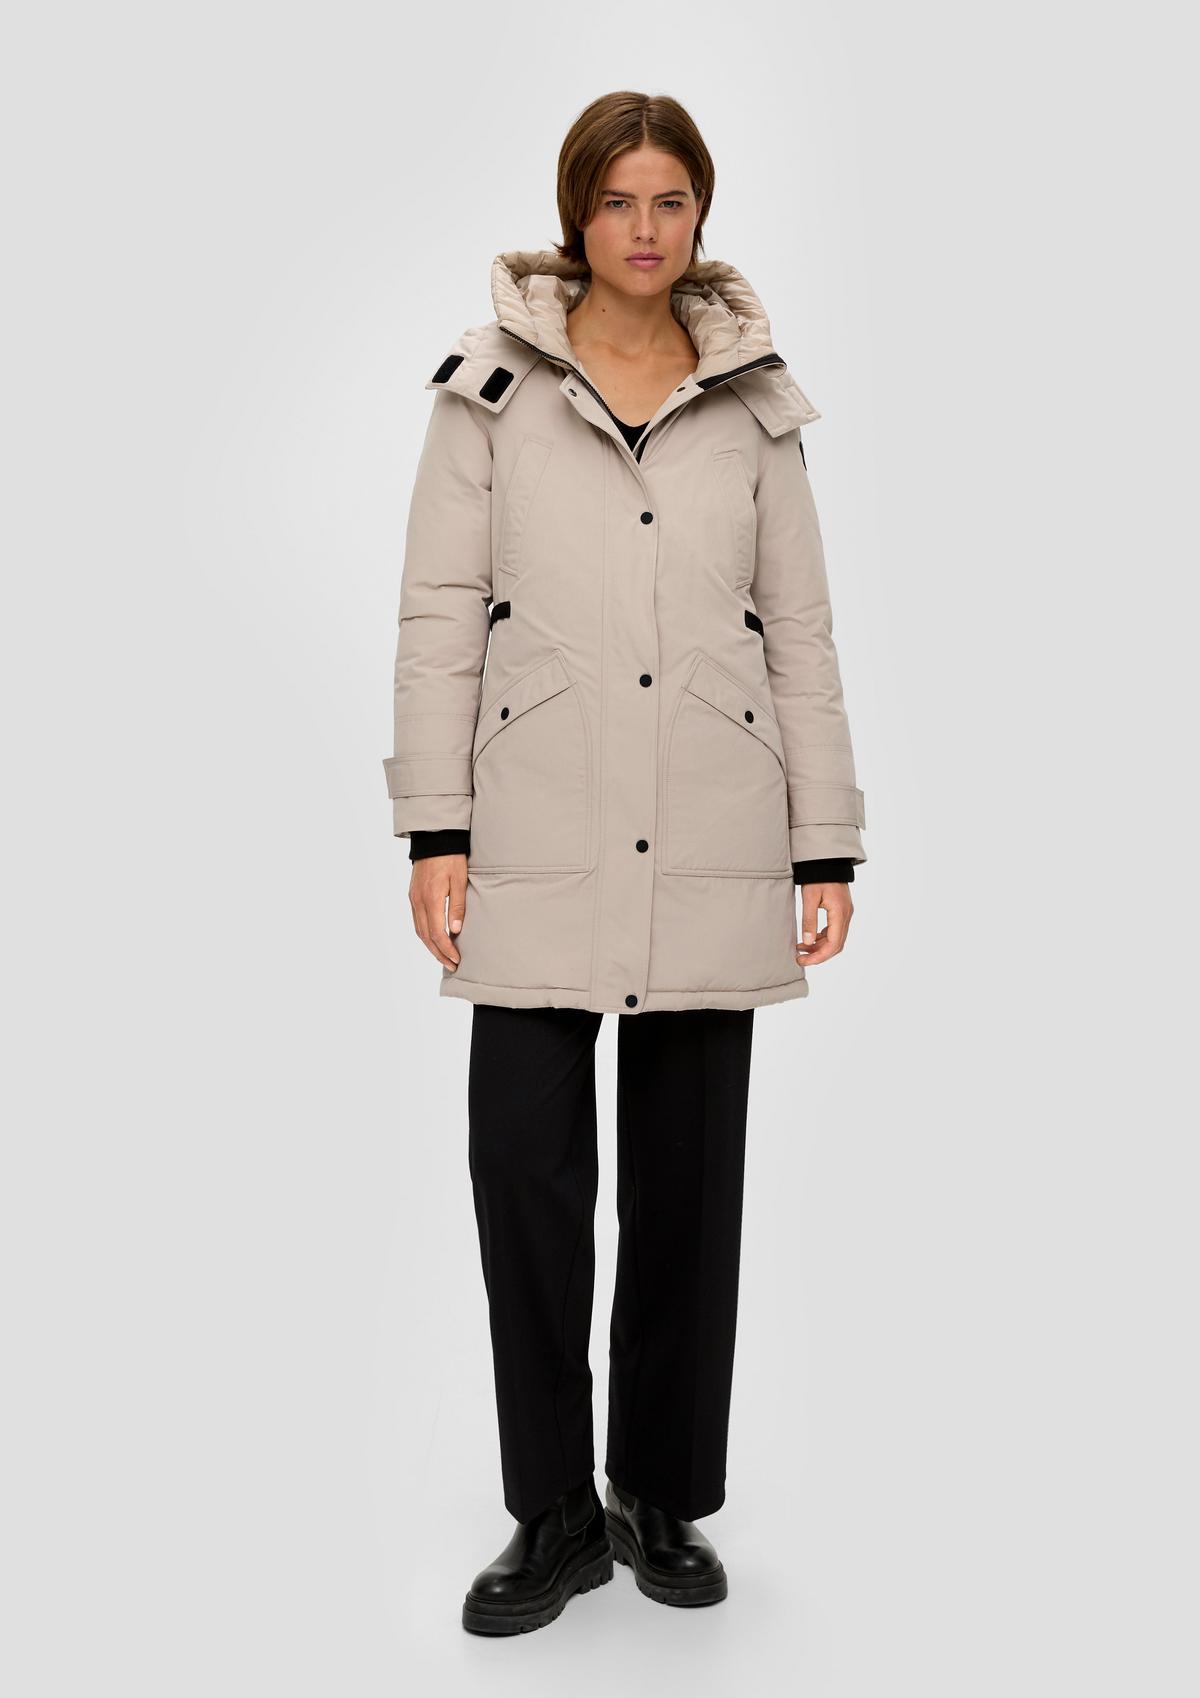 Parka with a double hood - light beige